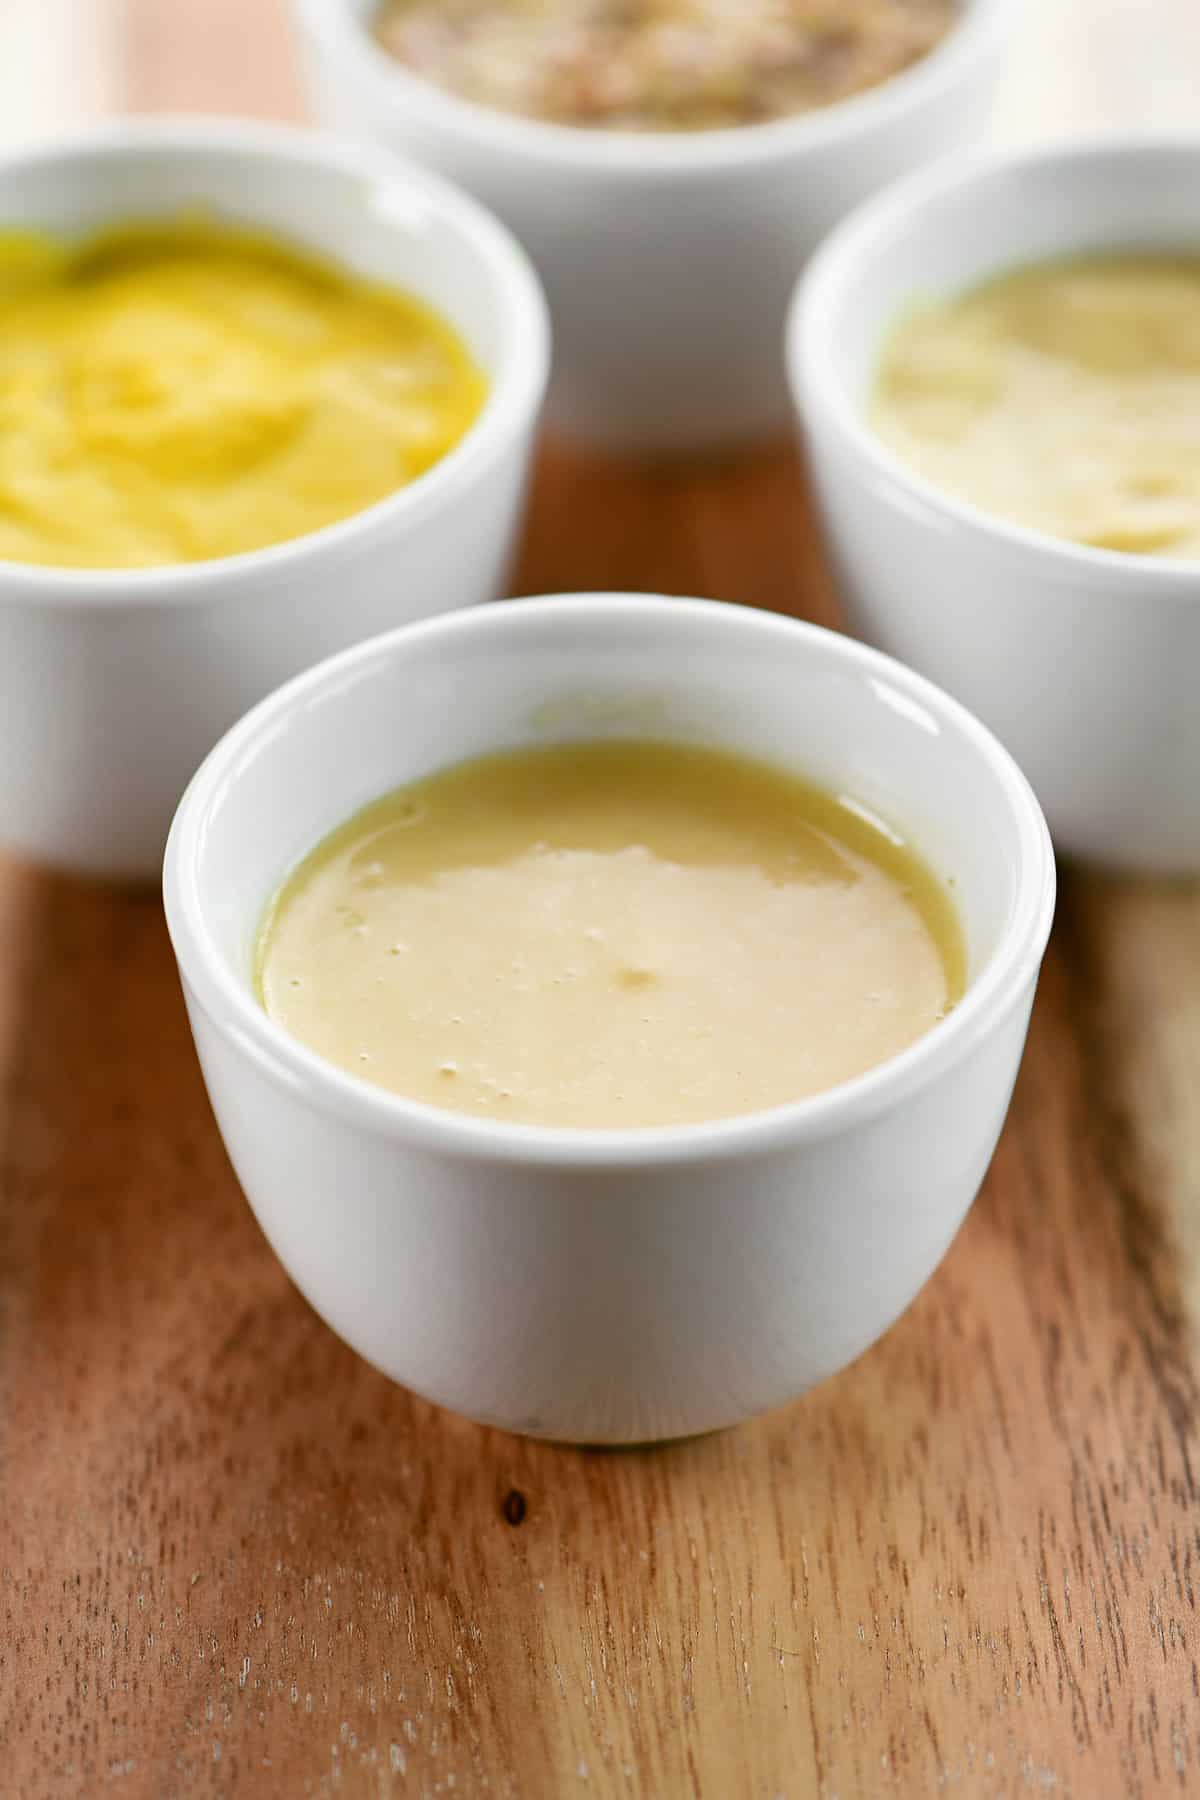 Spicy honey mustard in a small white condiment bowl.